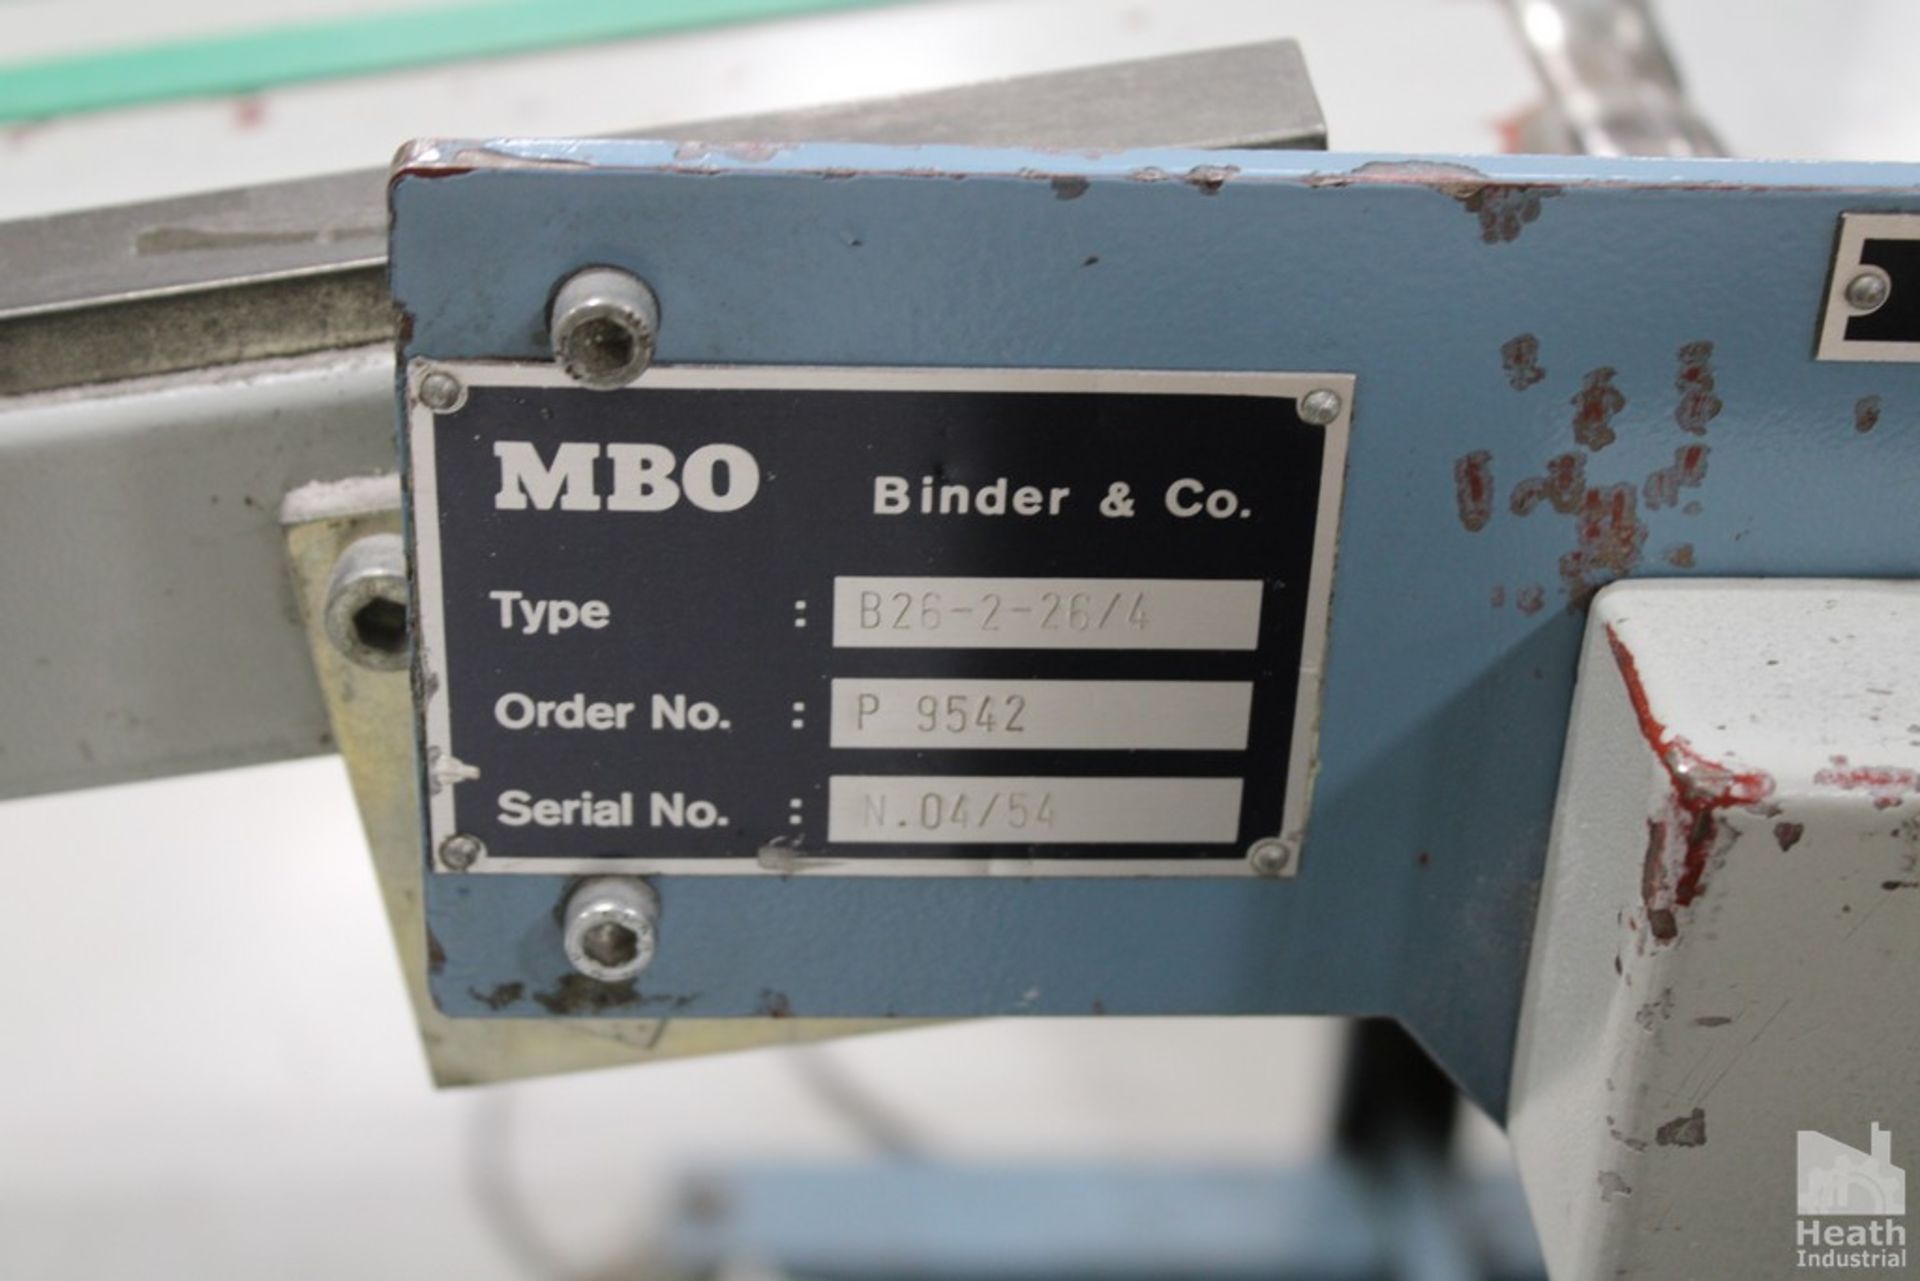 MBO FOUR PLATE BUCKLE FOLDING MACHINE S/NO 01/91 WITH ROUND PILE CONTINUOUS FEEDER, TYPE B26/2/26/ - Image 3 of 9